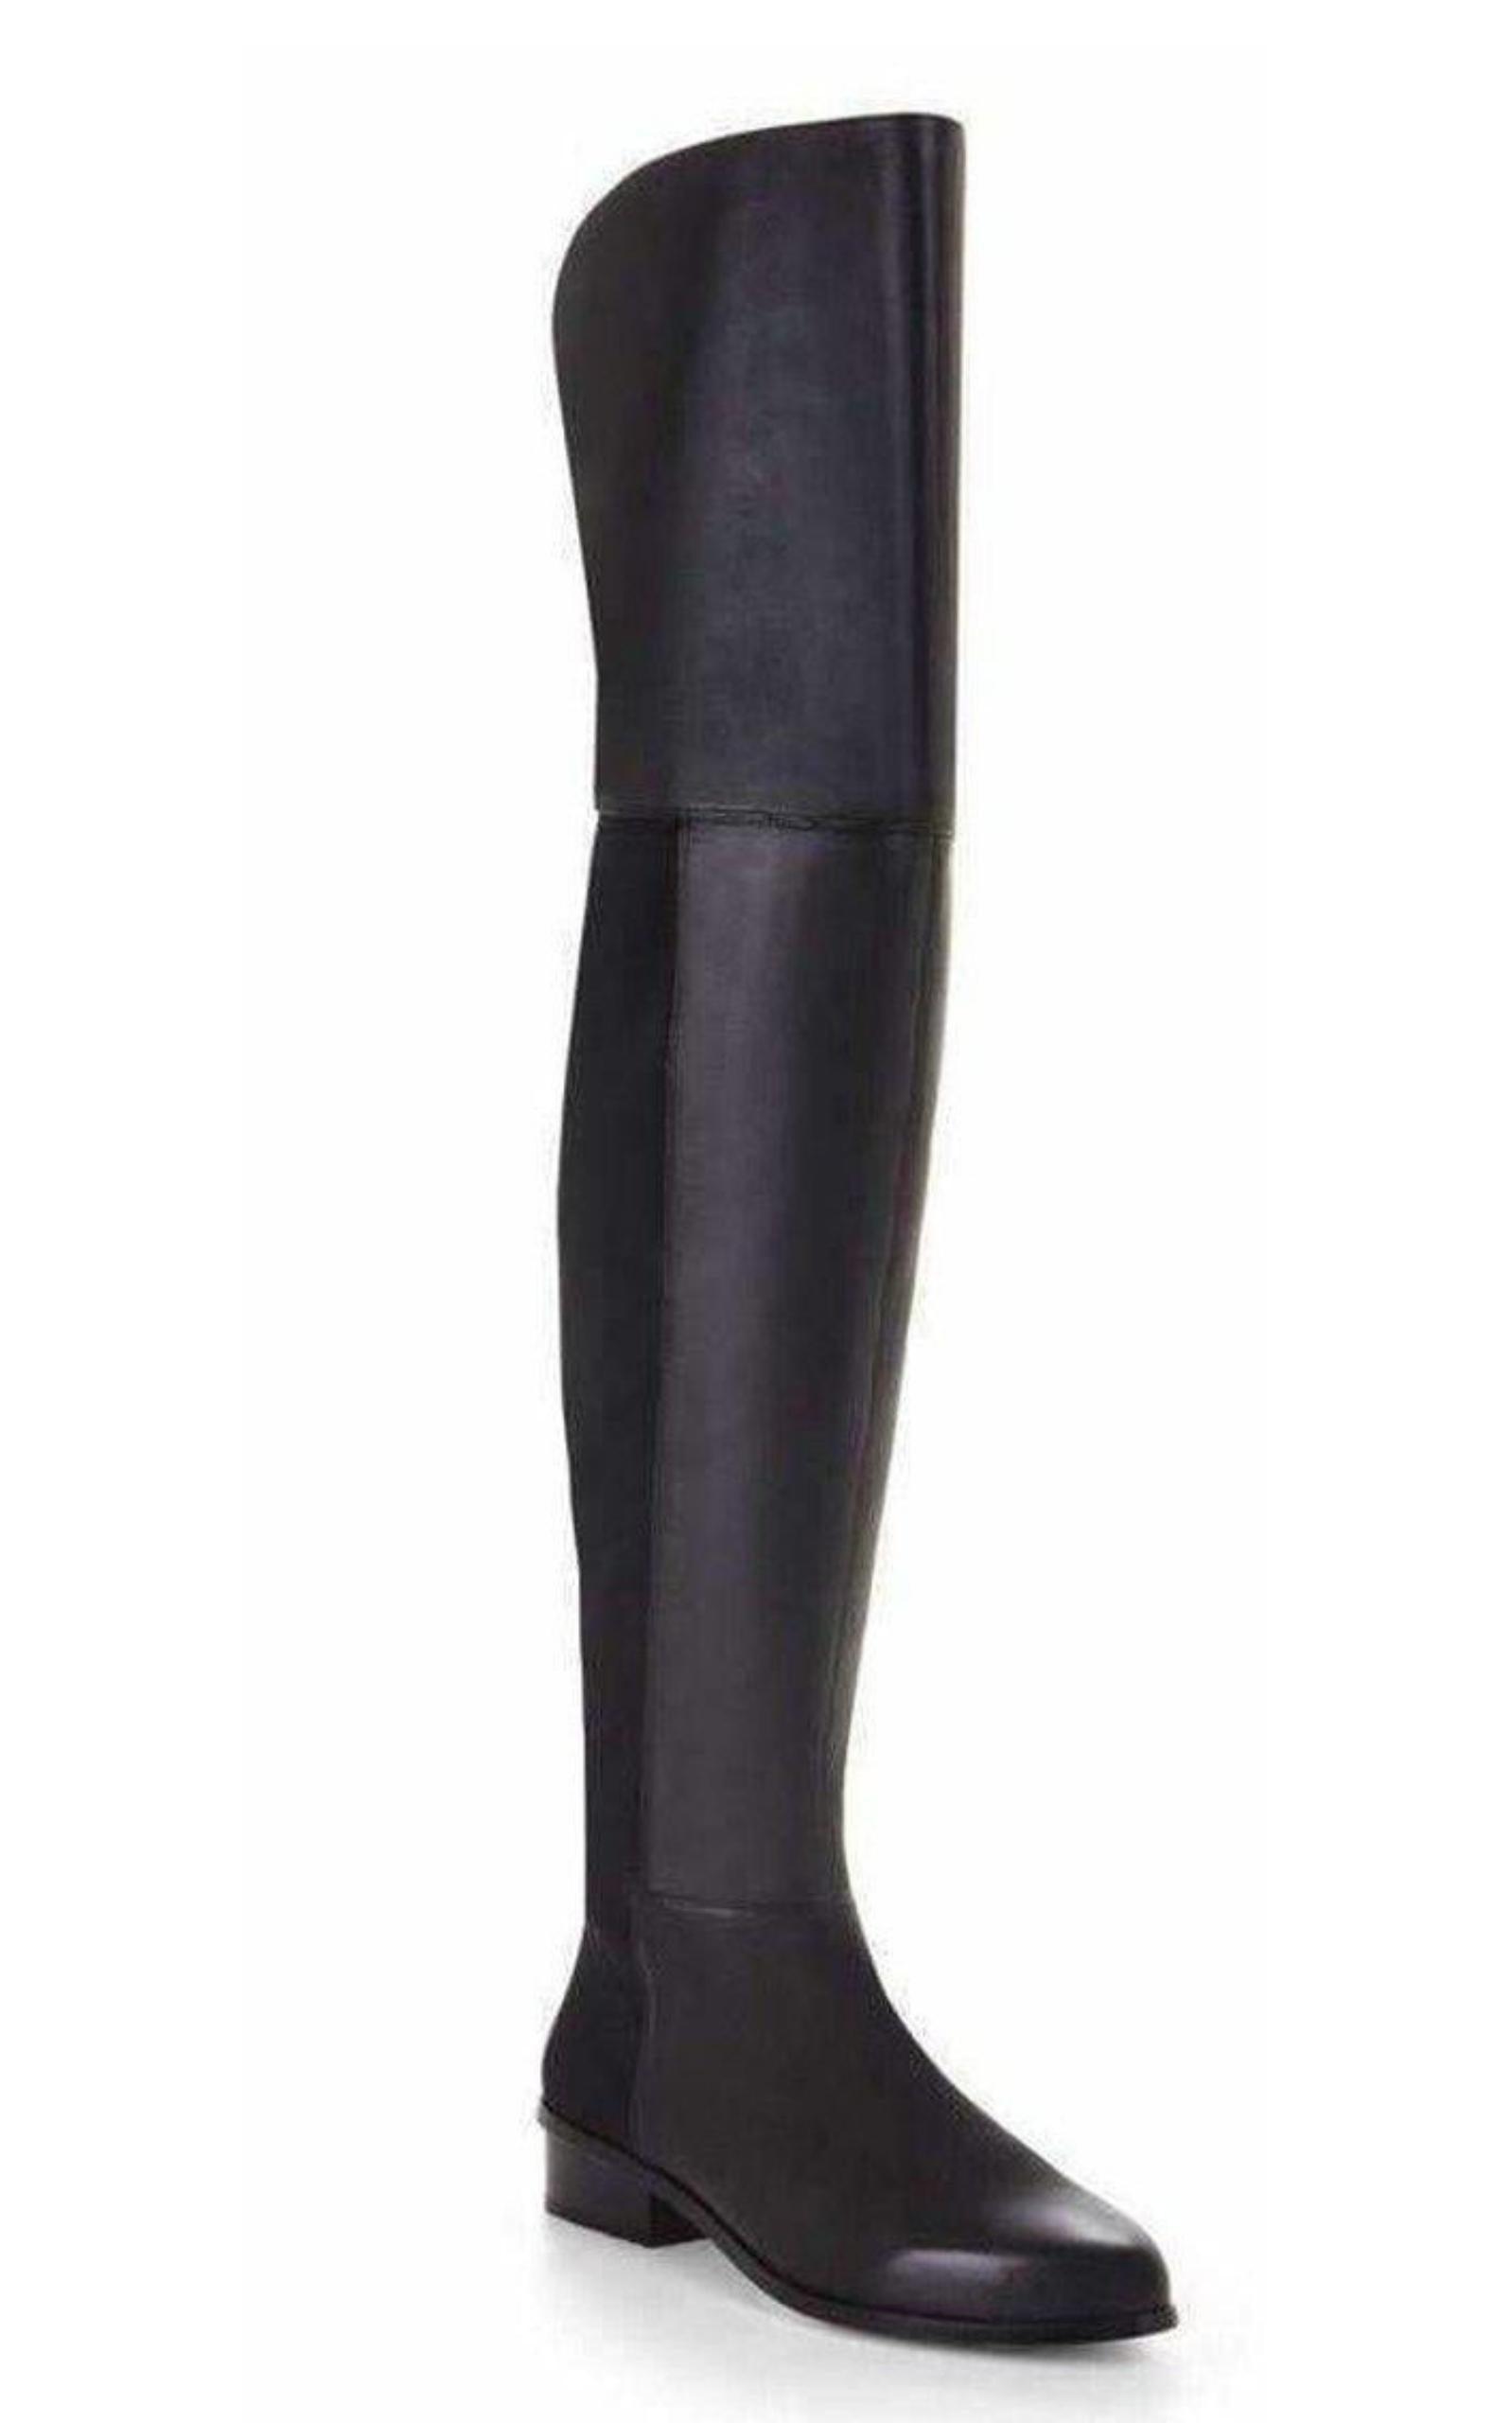  BCBGMAXAZRIASlink Over the Knee Black Leather Boots - Runway Catalog